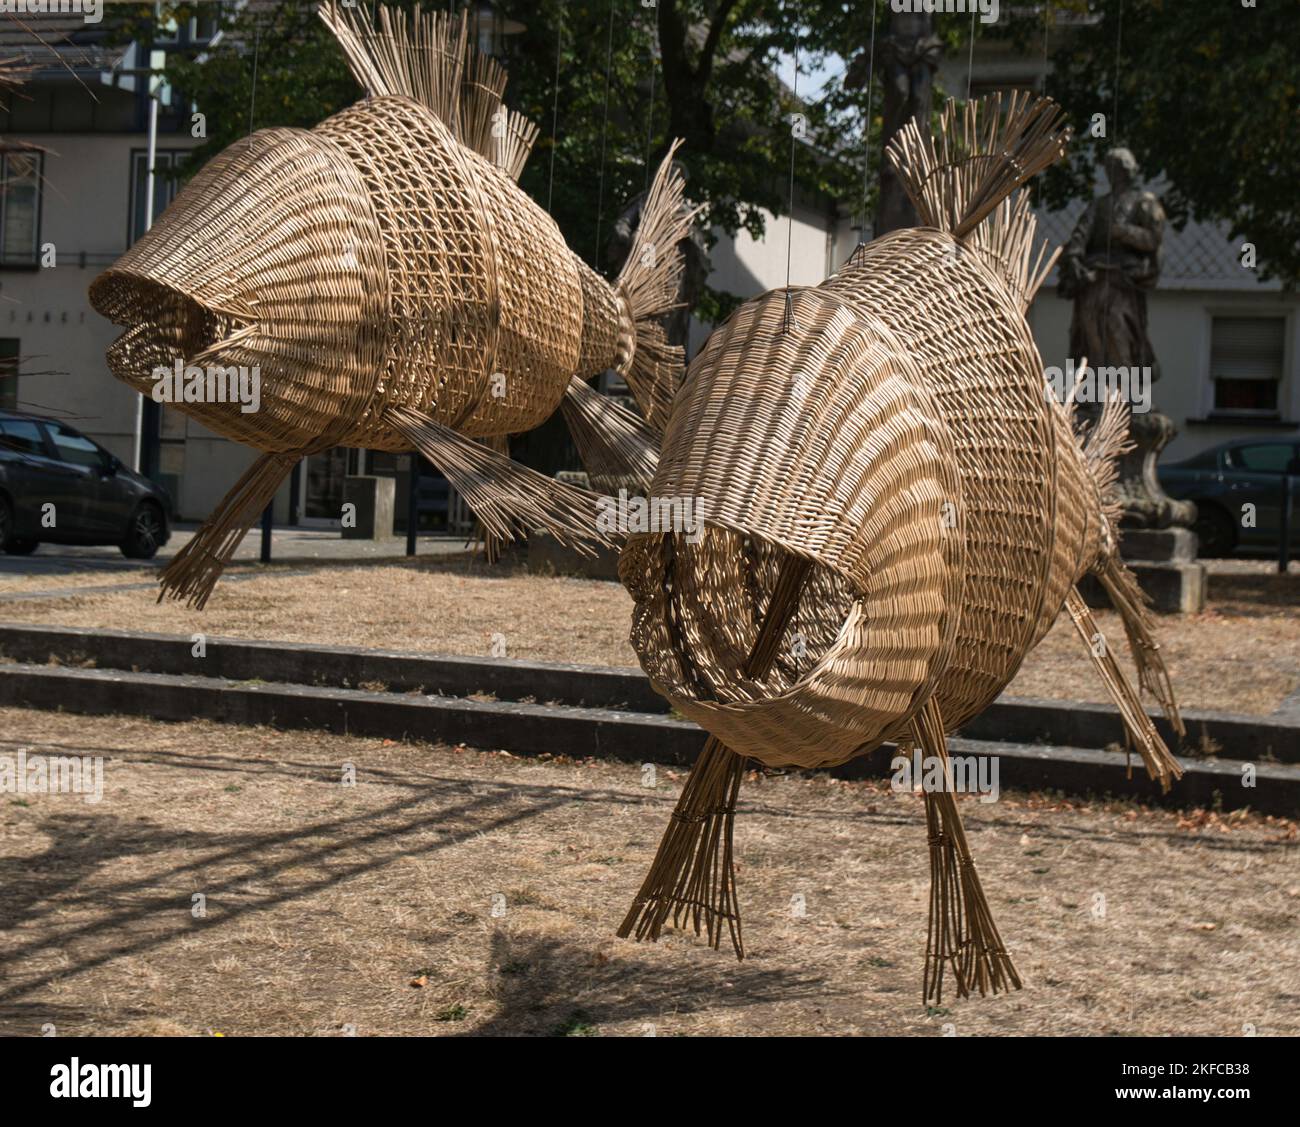 Model fish made of basketwork at Lichtenfels, Bavaria, Germany Stock Photo